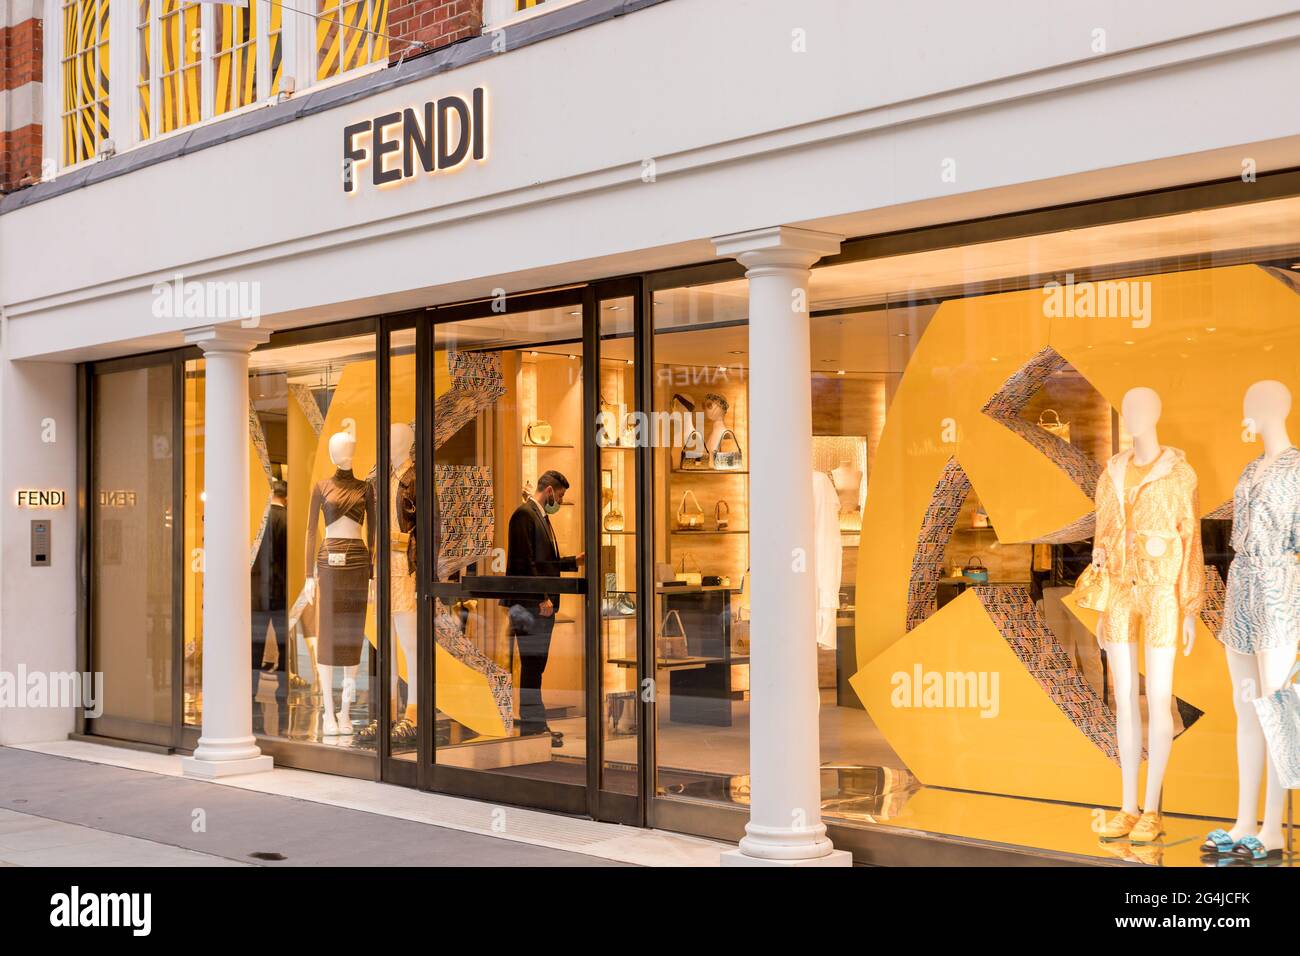 London, UK. June, 2021. Fendi is seen at one of their stores on New Bond in London. Credit: Belinda Jiao/SOPA Wire/Alamy Live News Stock Photo - Alamy